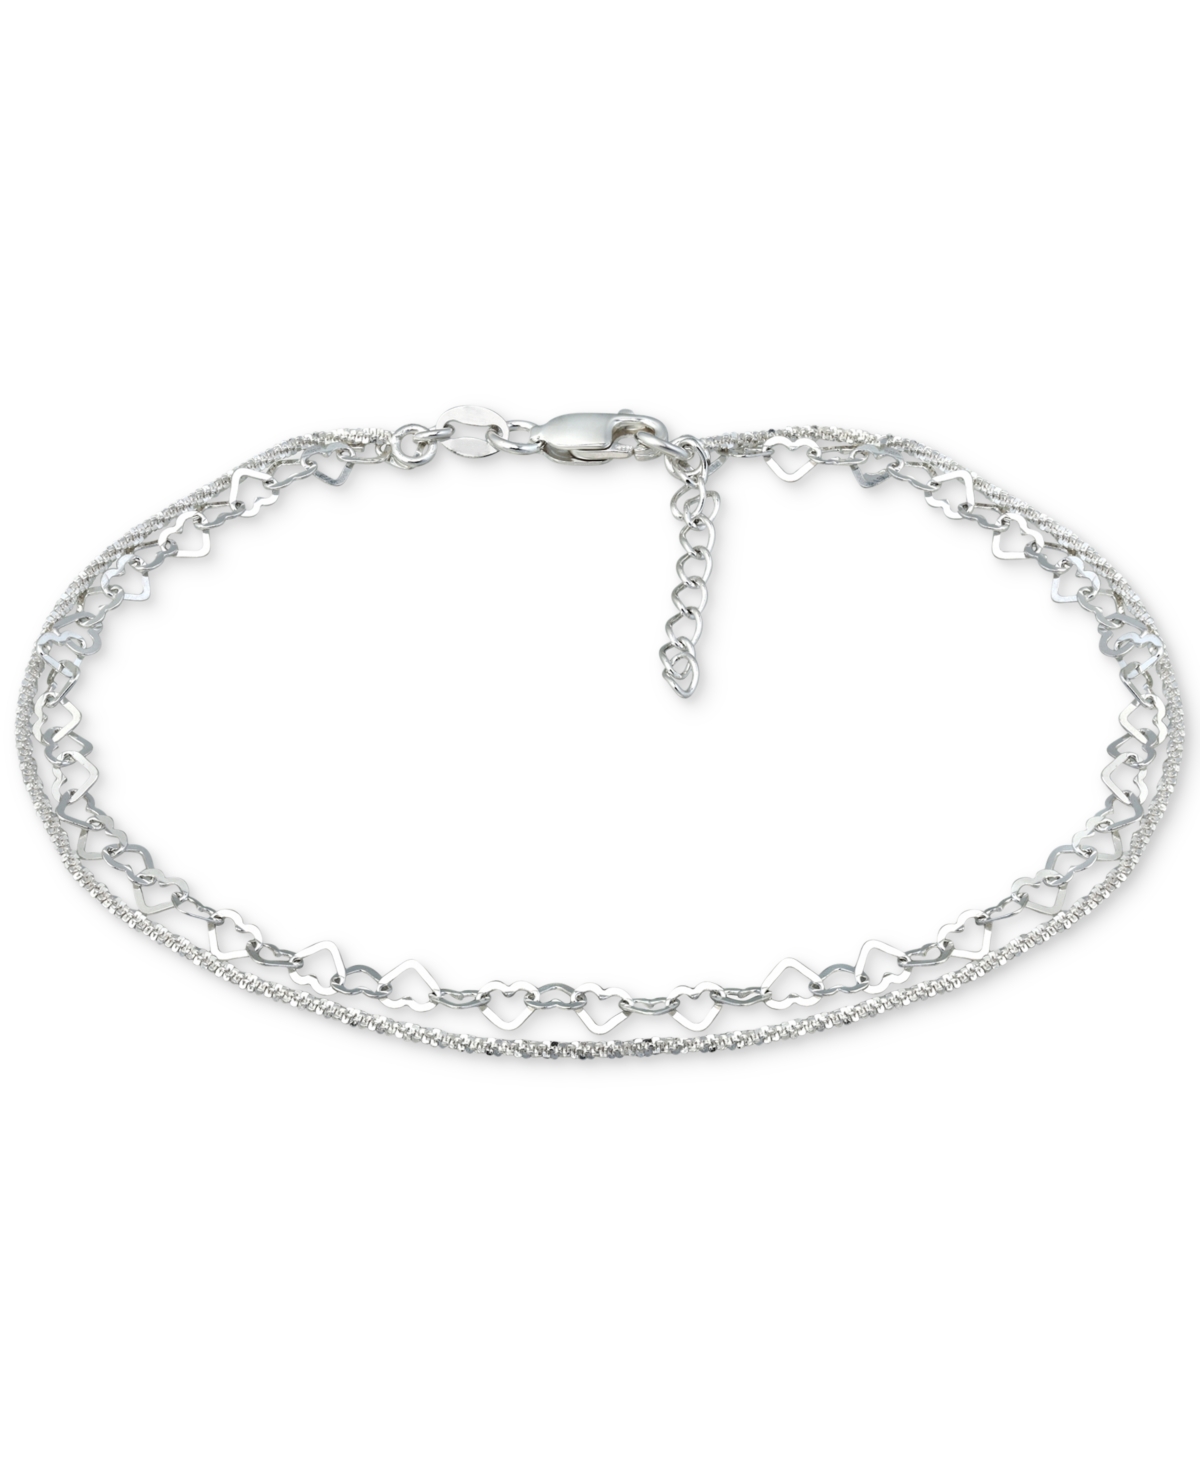 Giani Bernini Double Row Heart Ankle Bracelet in 18k Gold-Plated Sterling Silver & Sterling Silver, Created for Macy's